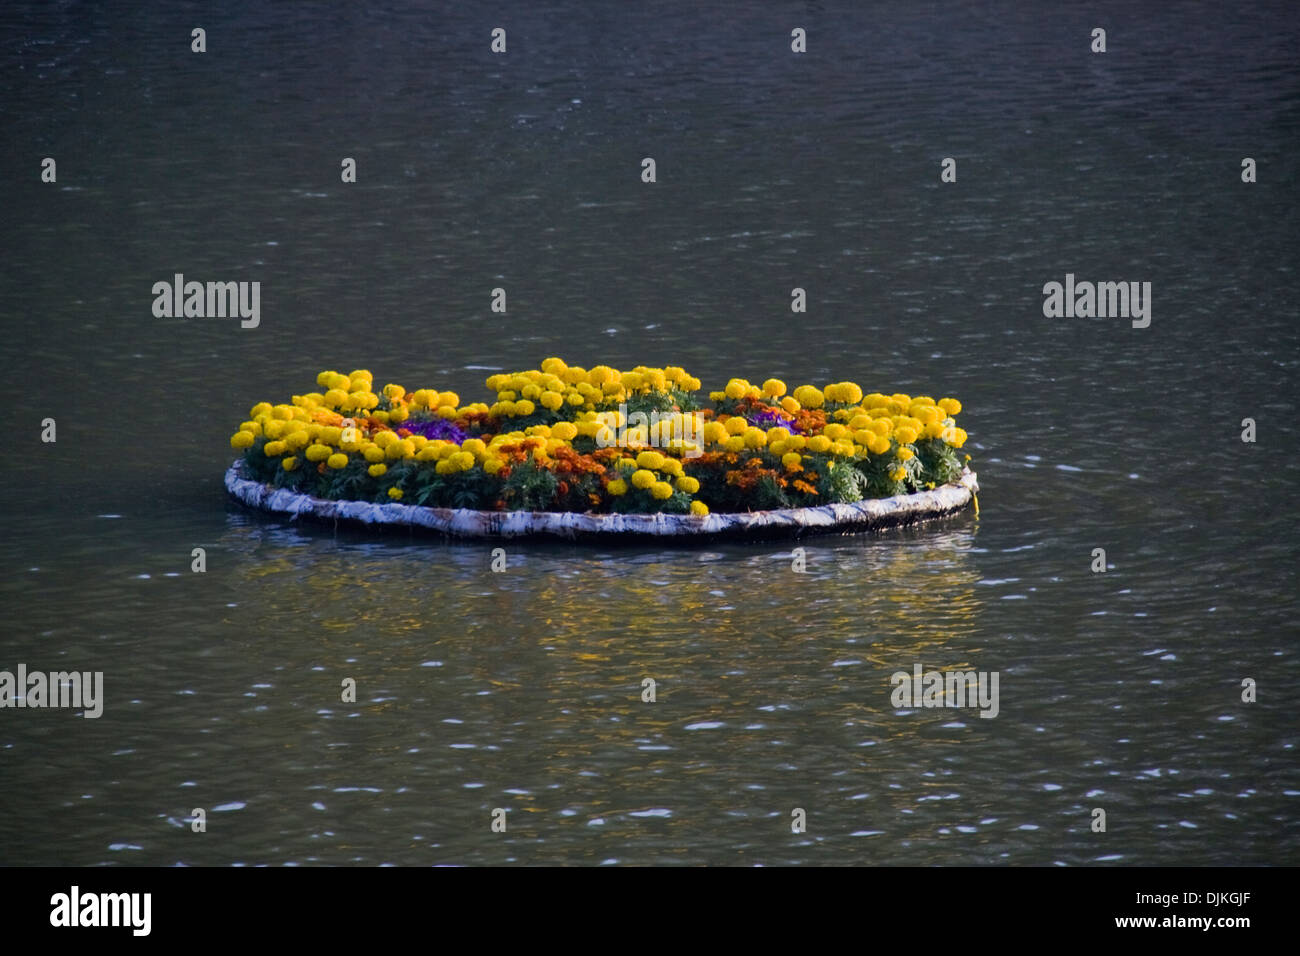 Tray of yellow, decorative flowers floating on lake water Stock Photo